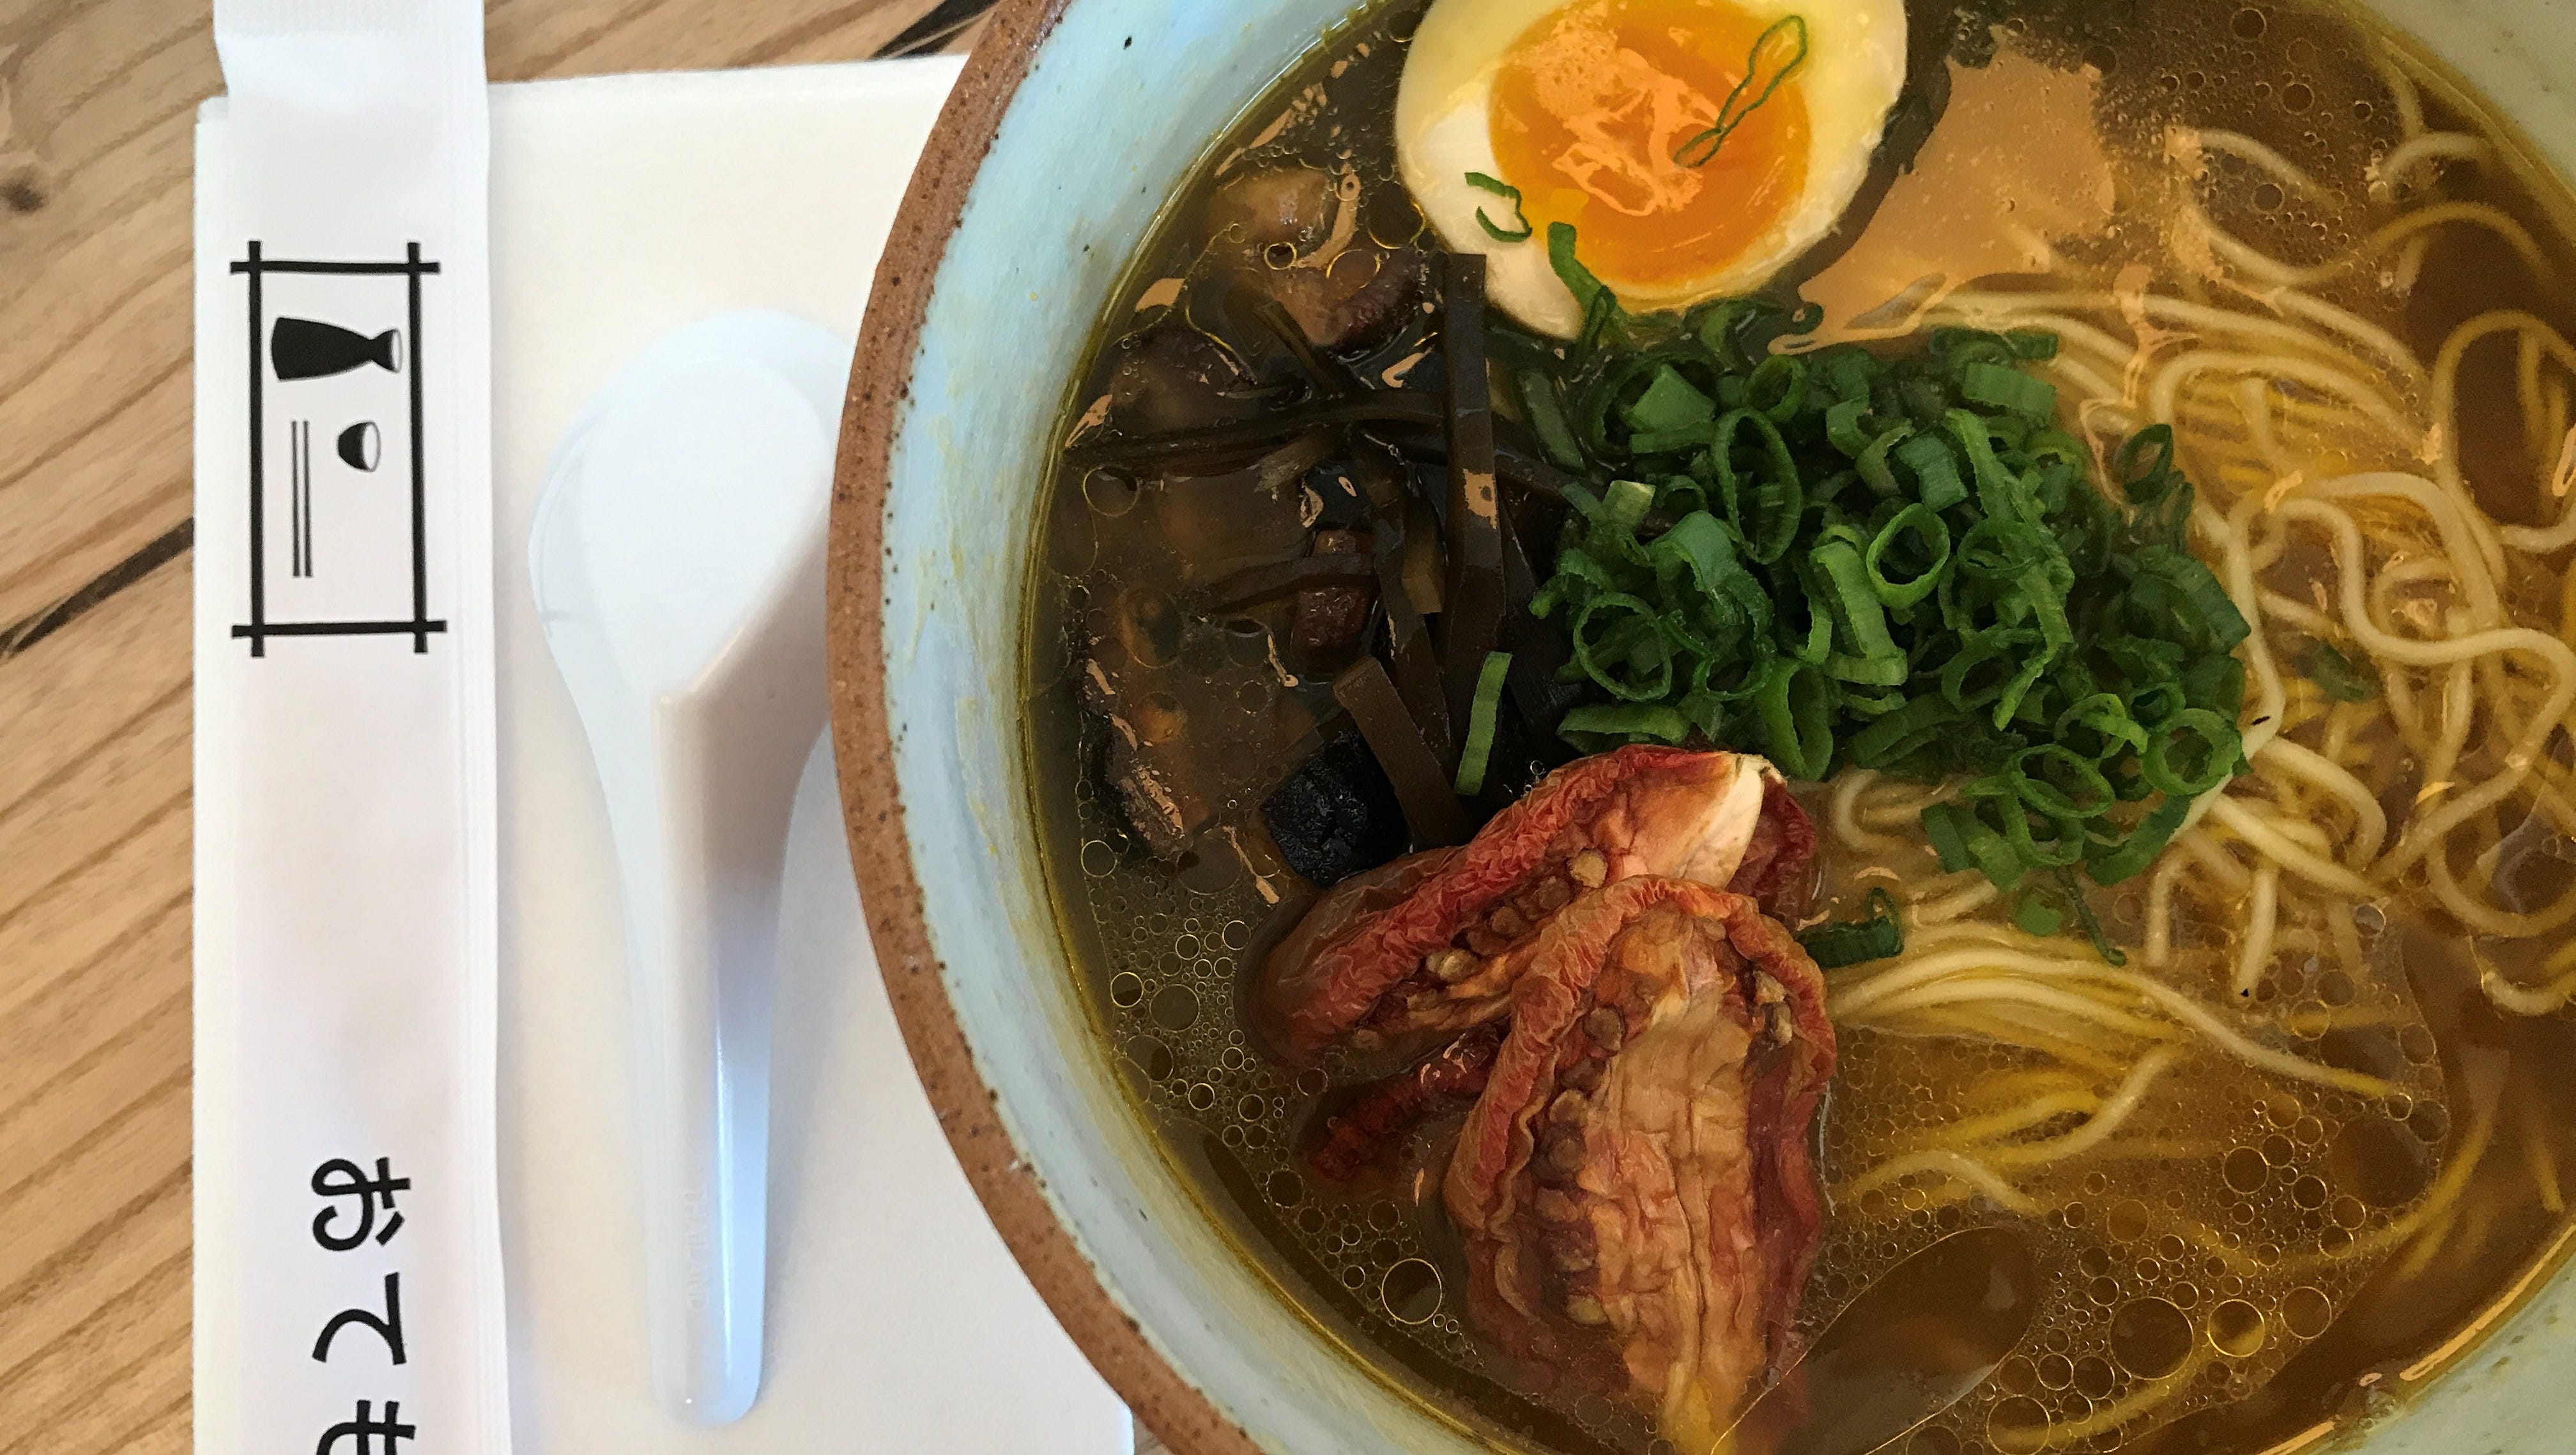 The insanely ramen you should in right now